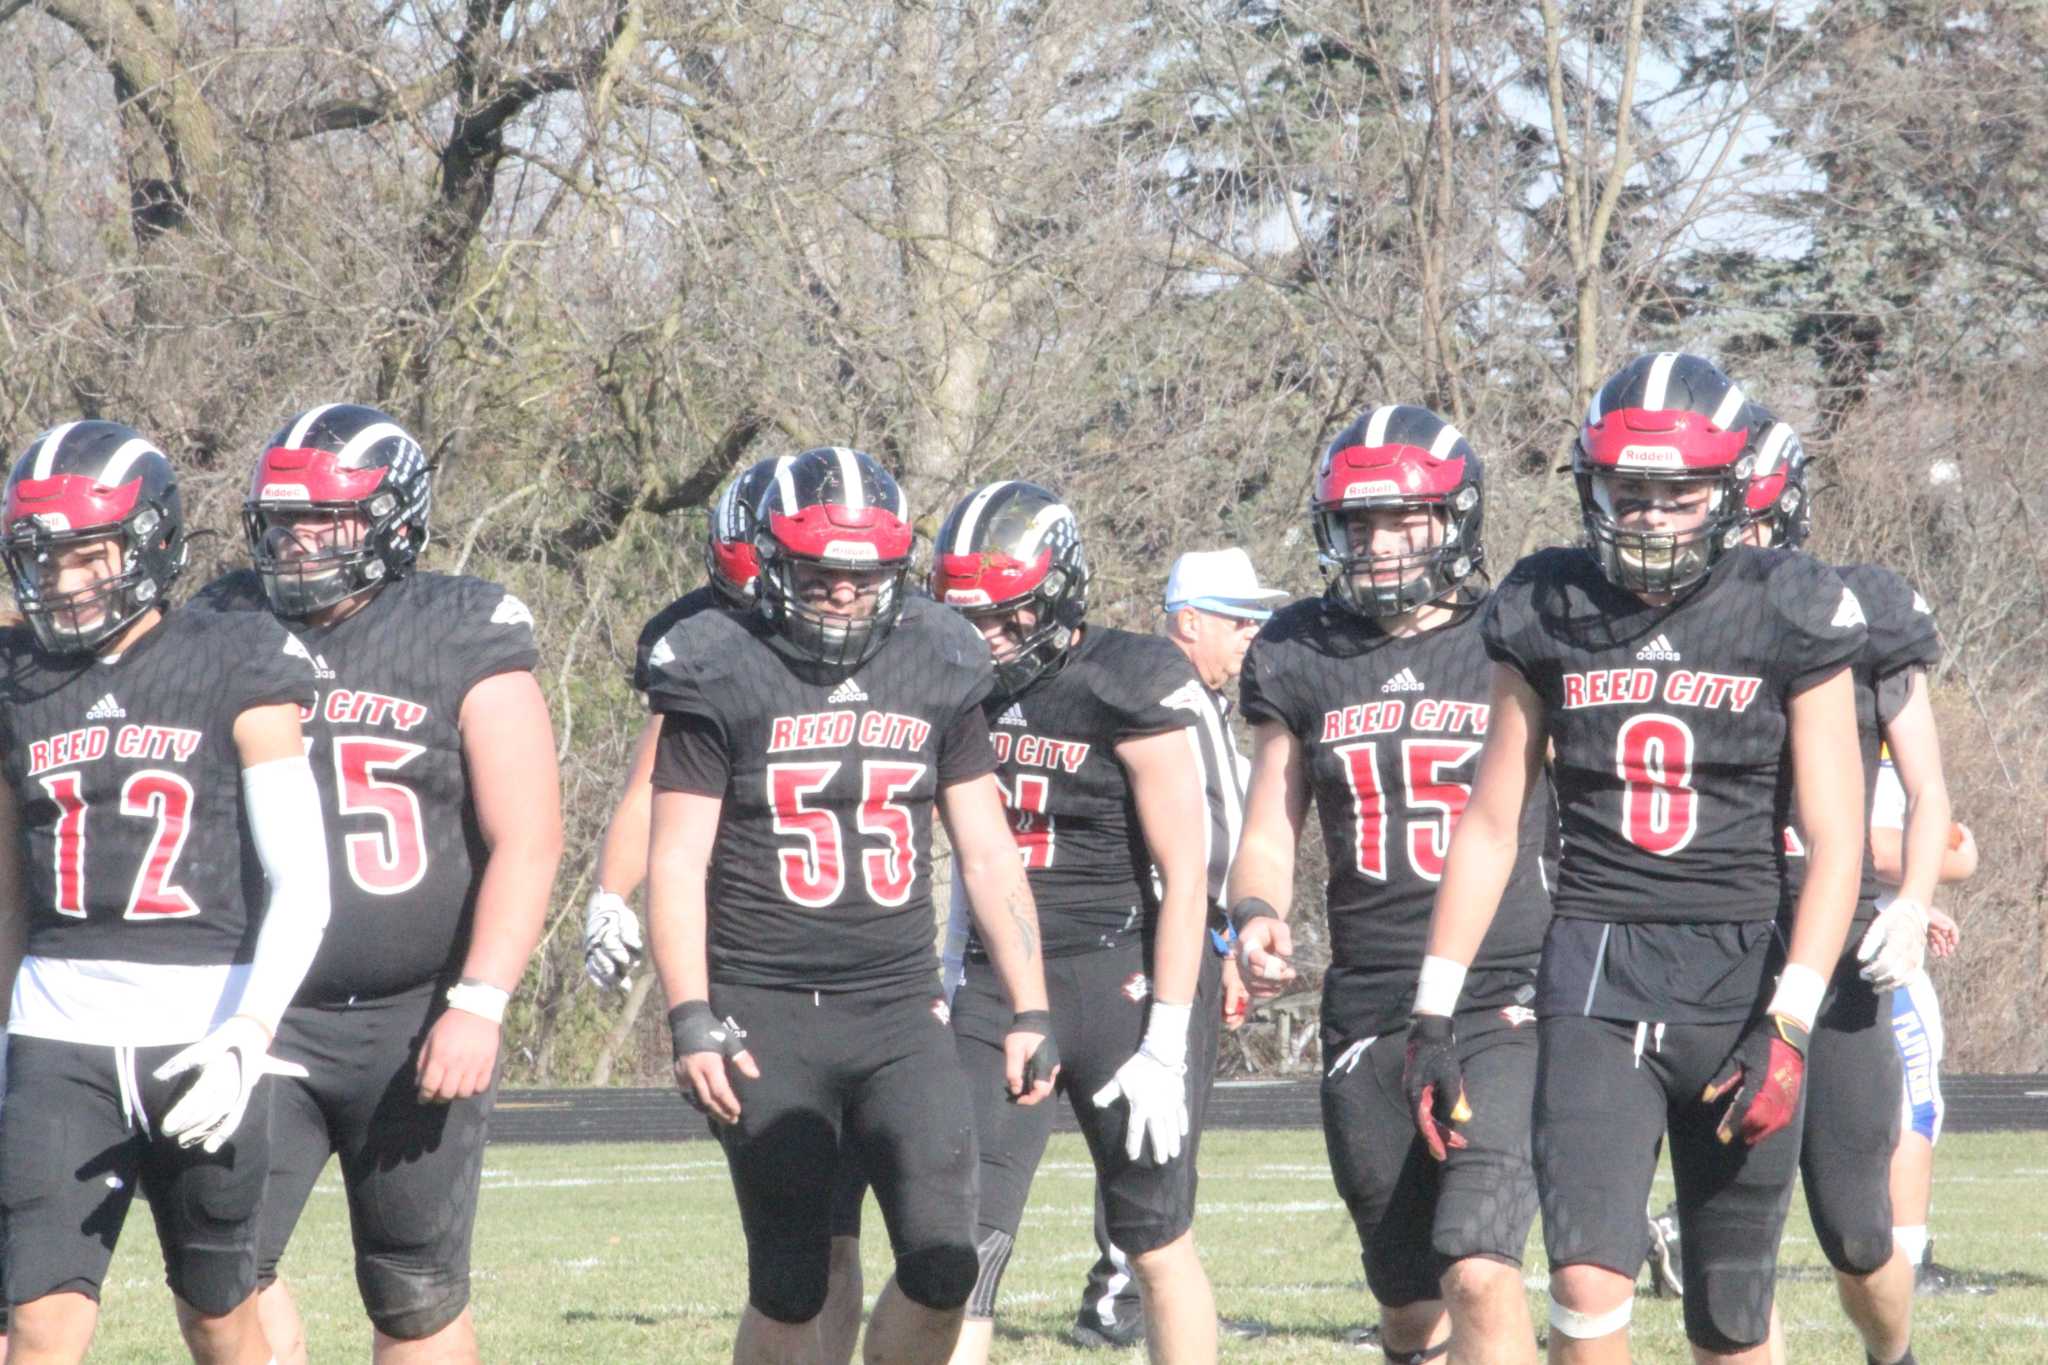 Reed City forfeits regional championship football game